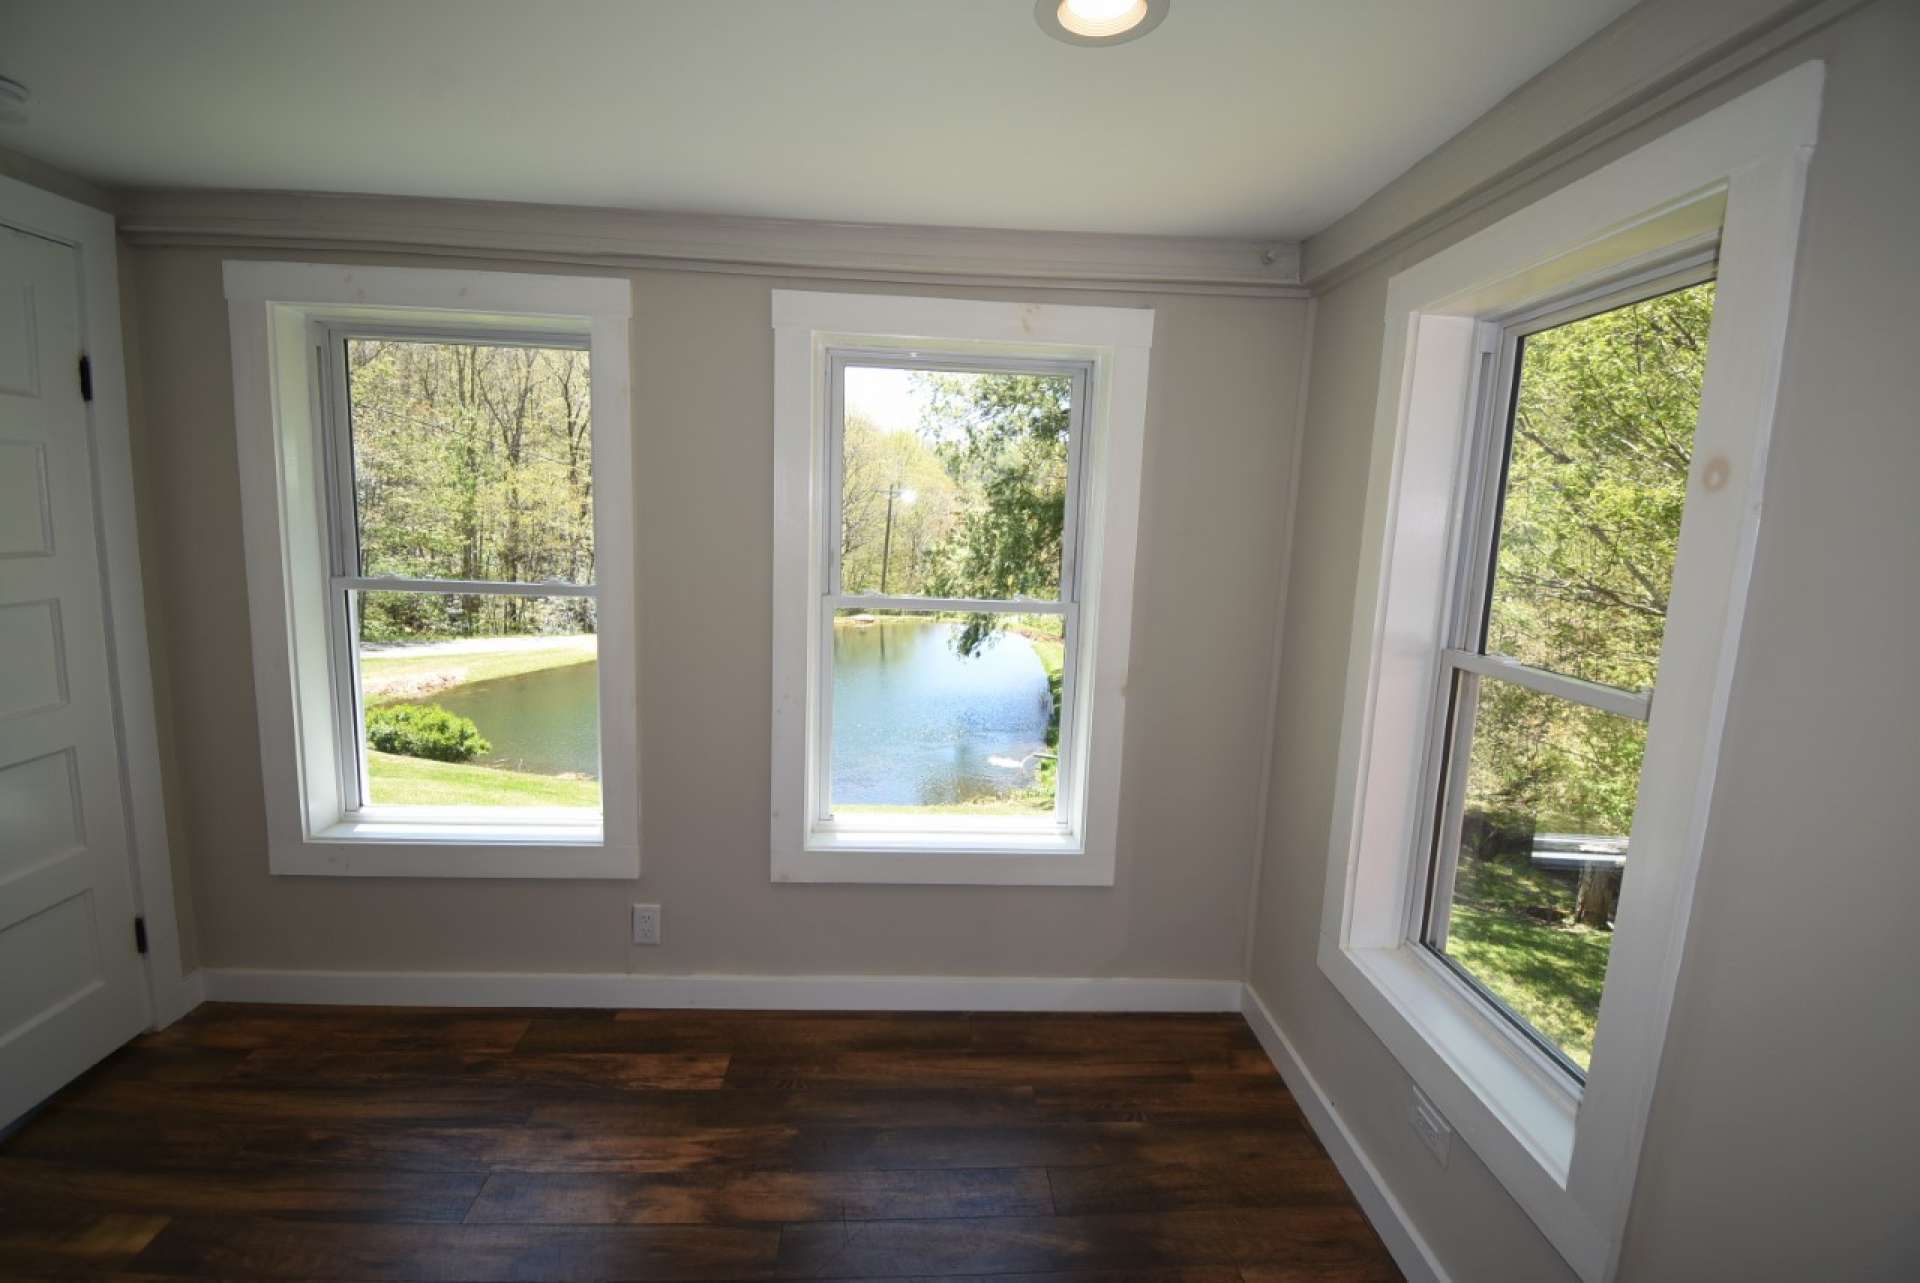 You can also enjoy views of the pond from the master suite.